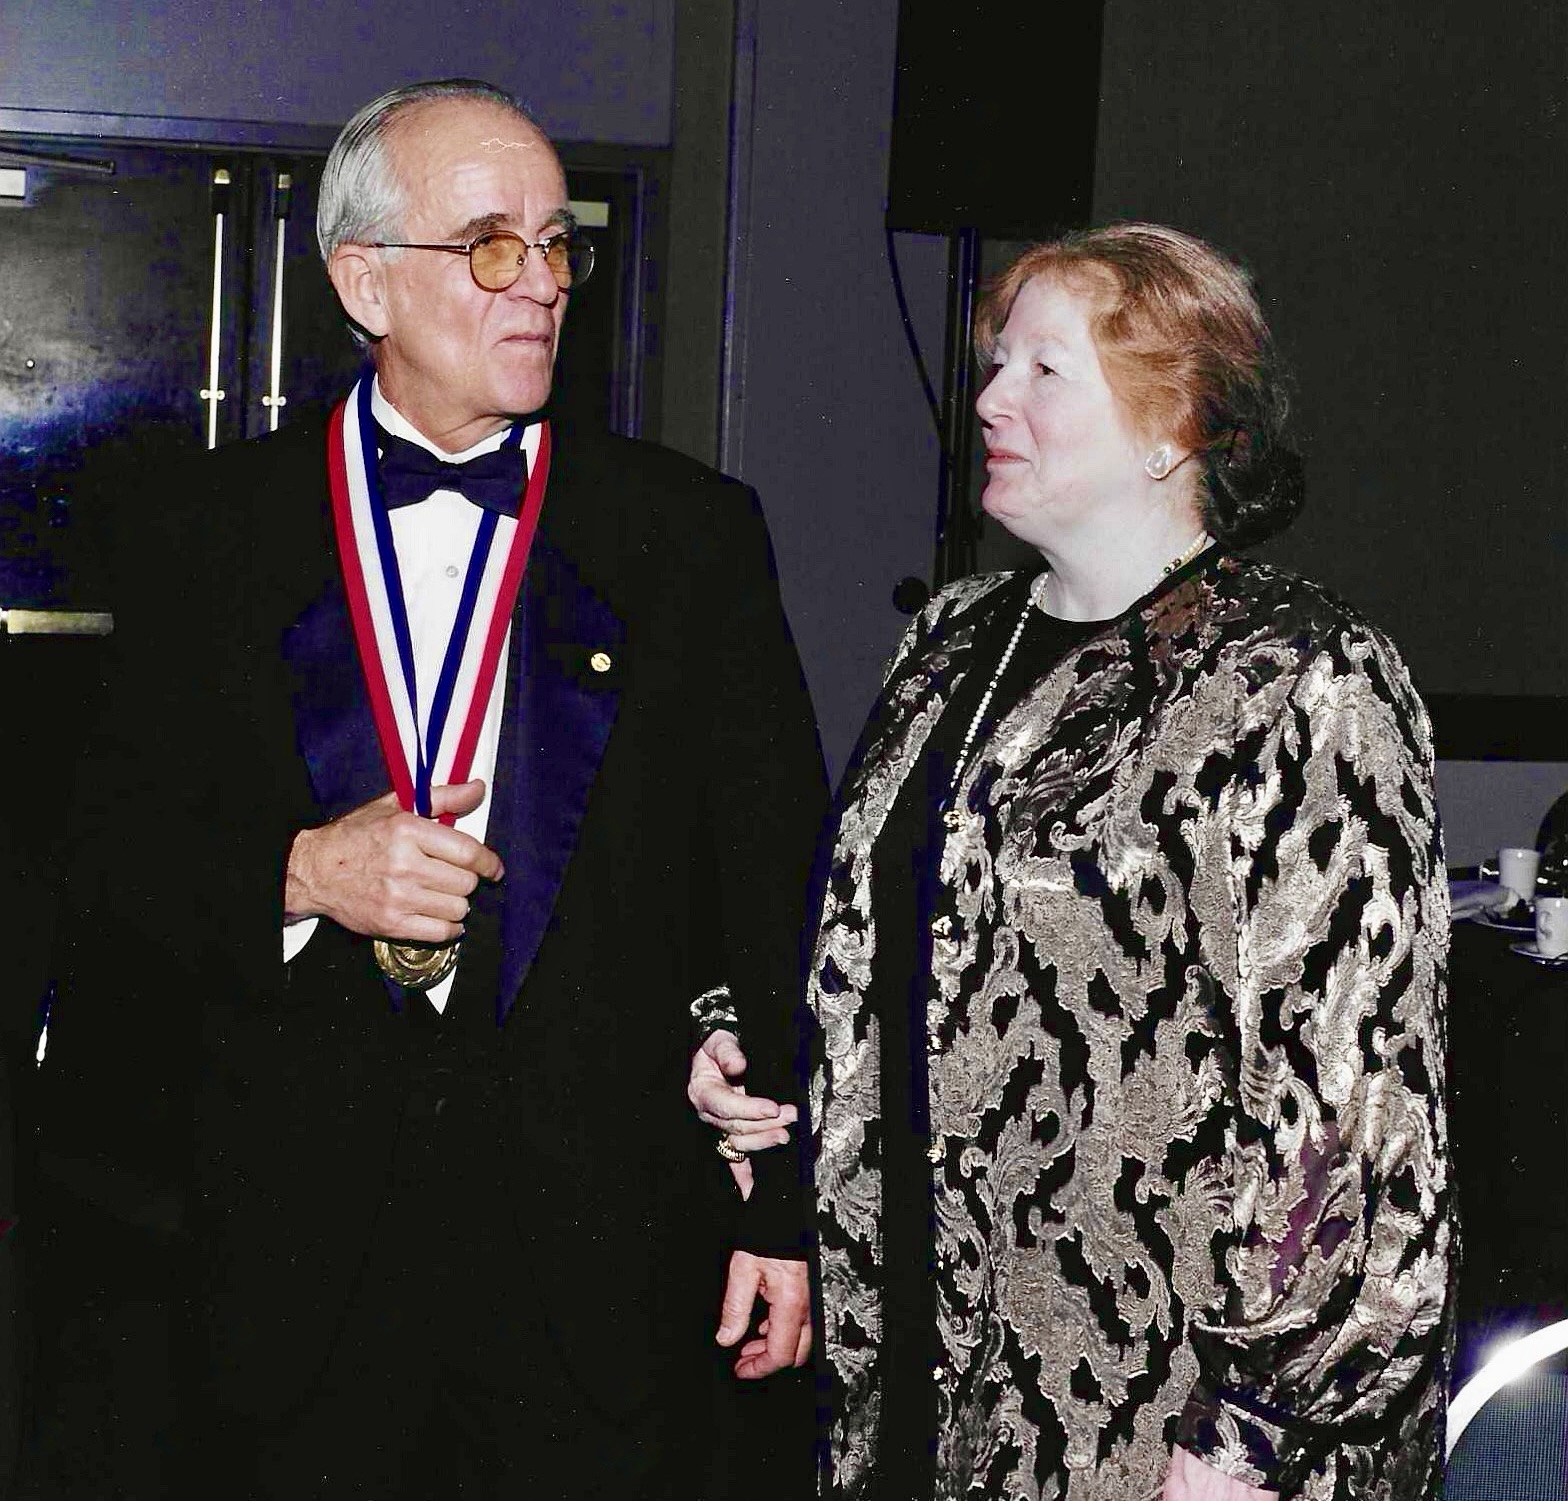 Bernie and his wife Betty